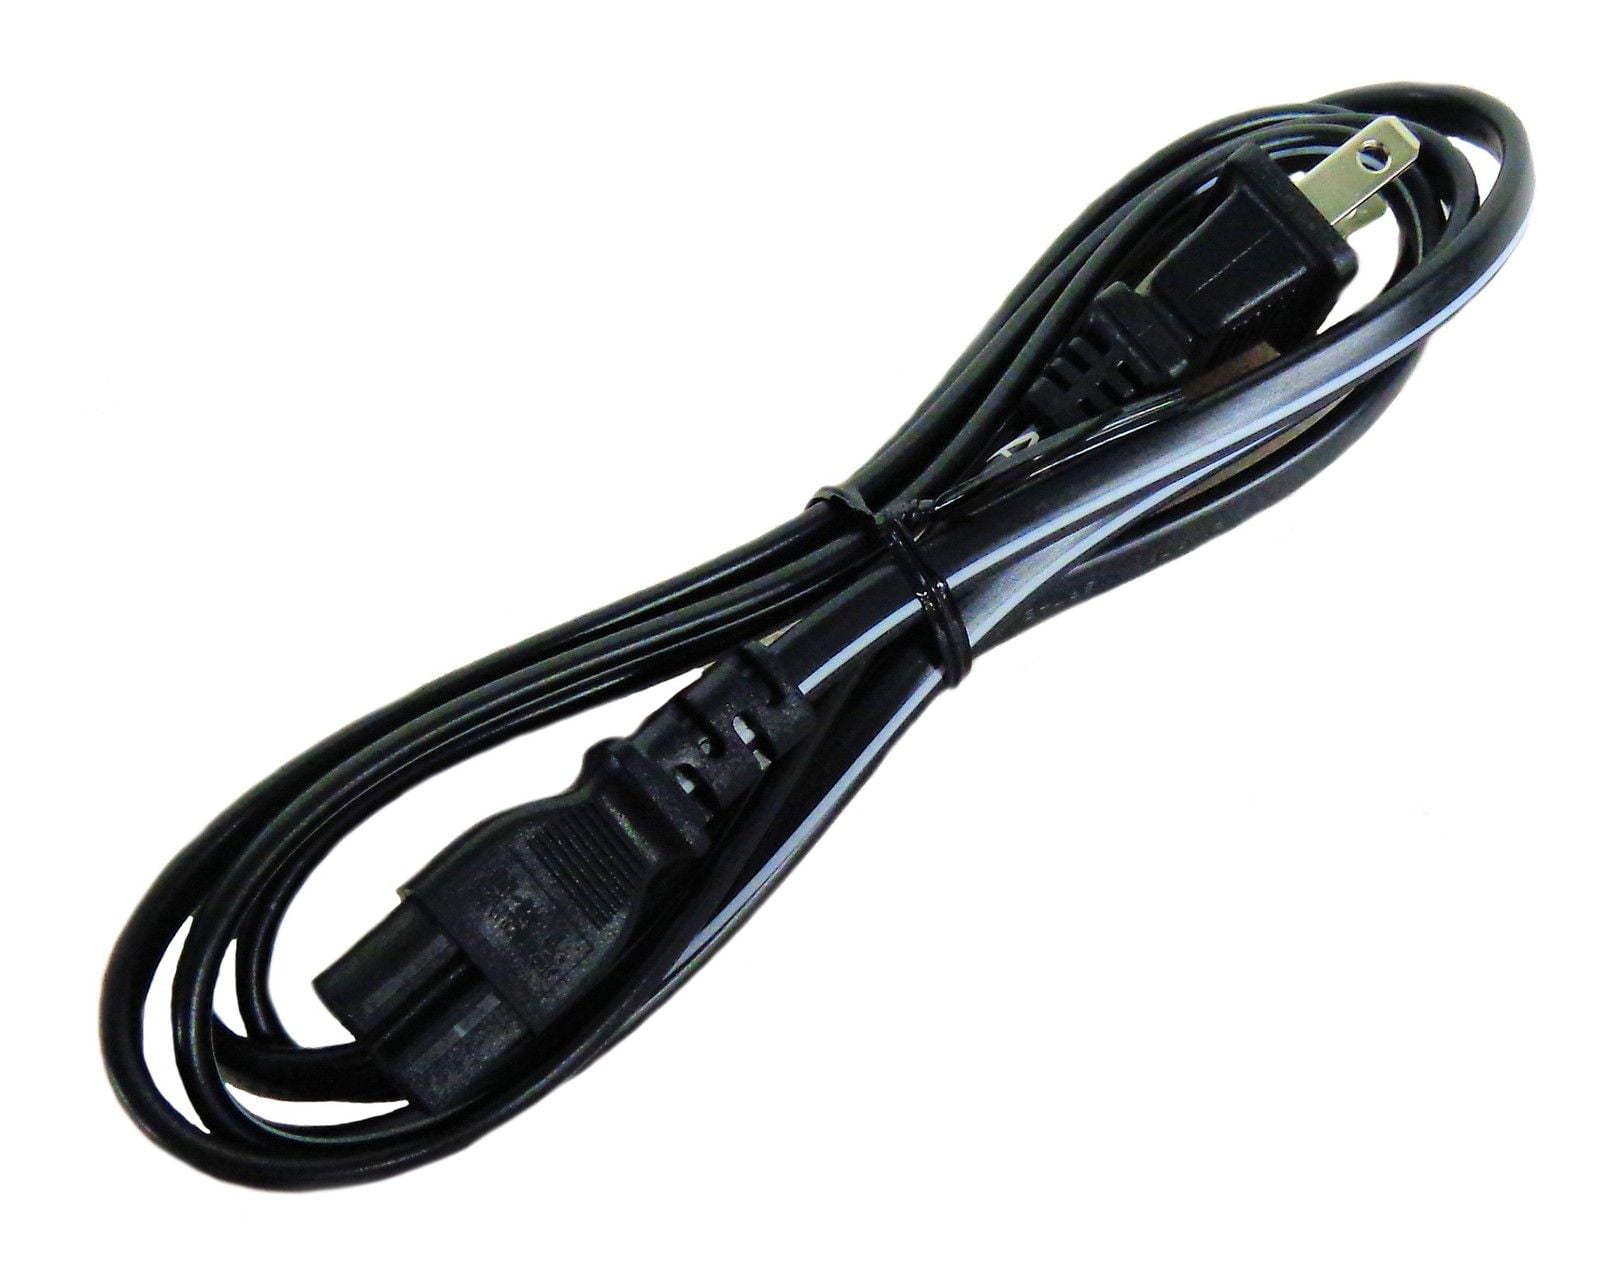 Super Power Supply® AC Cord for Sony CFD-G505 CFDG505 CD Boombox Radio 